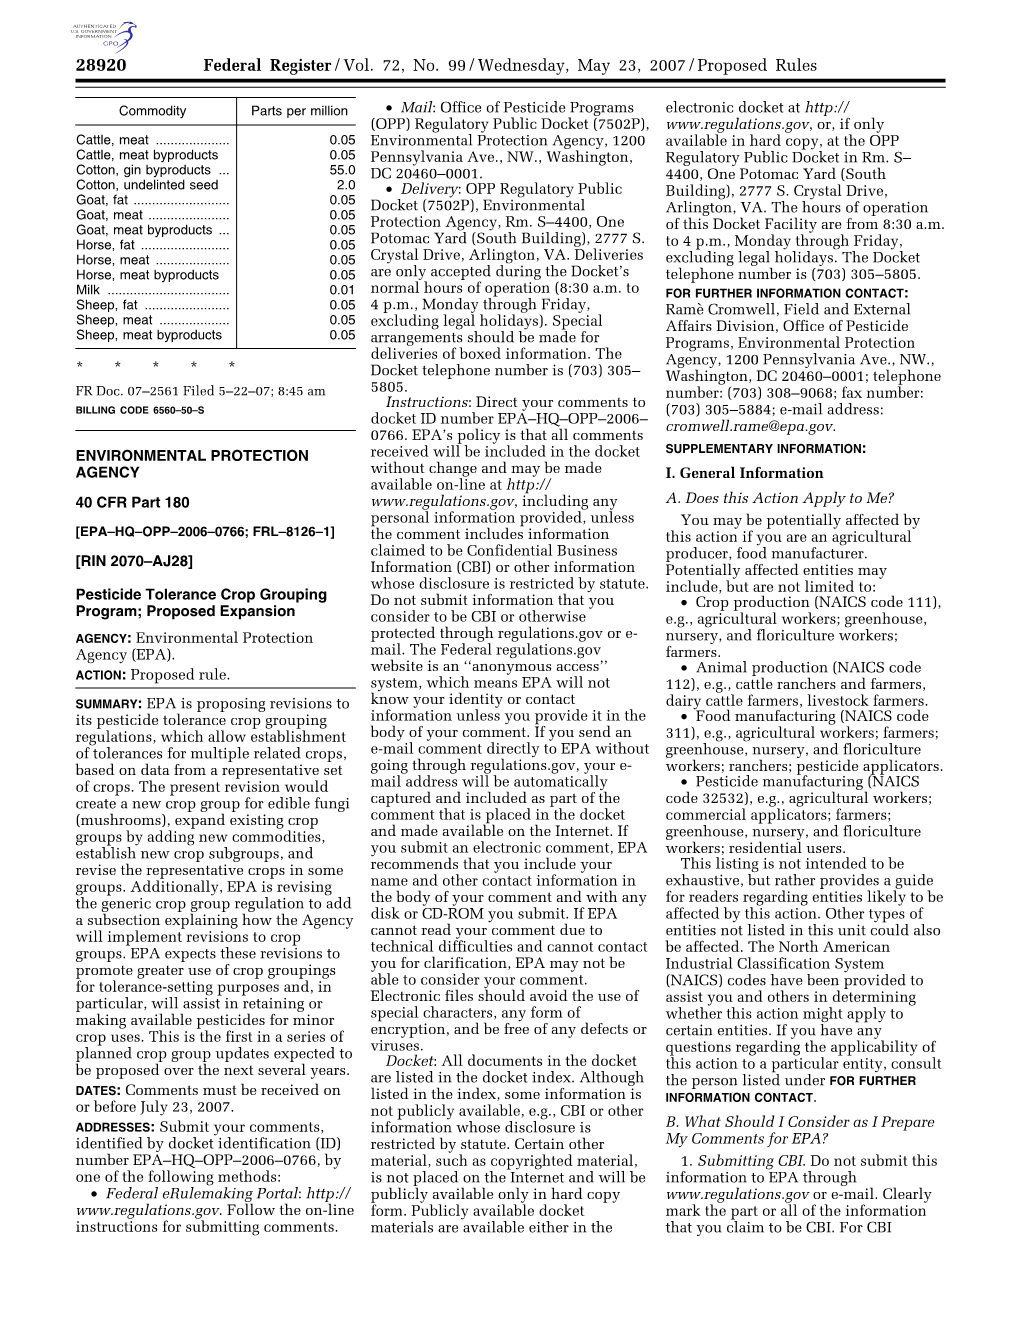 Federal Register/Vol. 72, No. 99/Wednesday, May 23, 2007